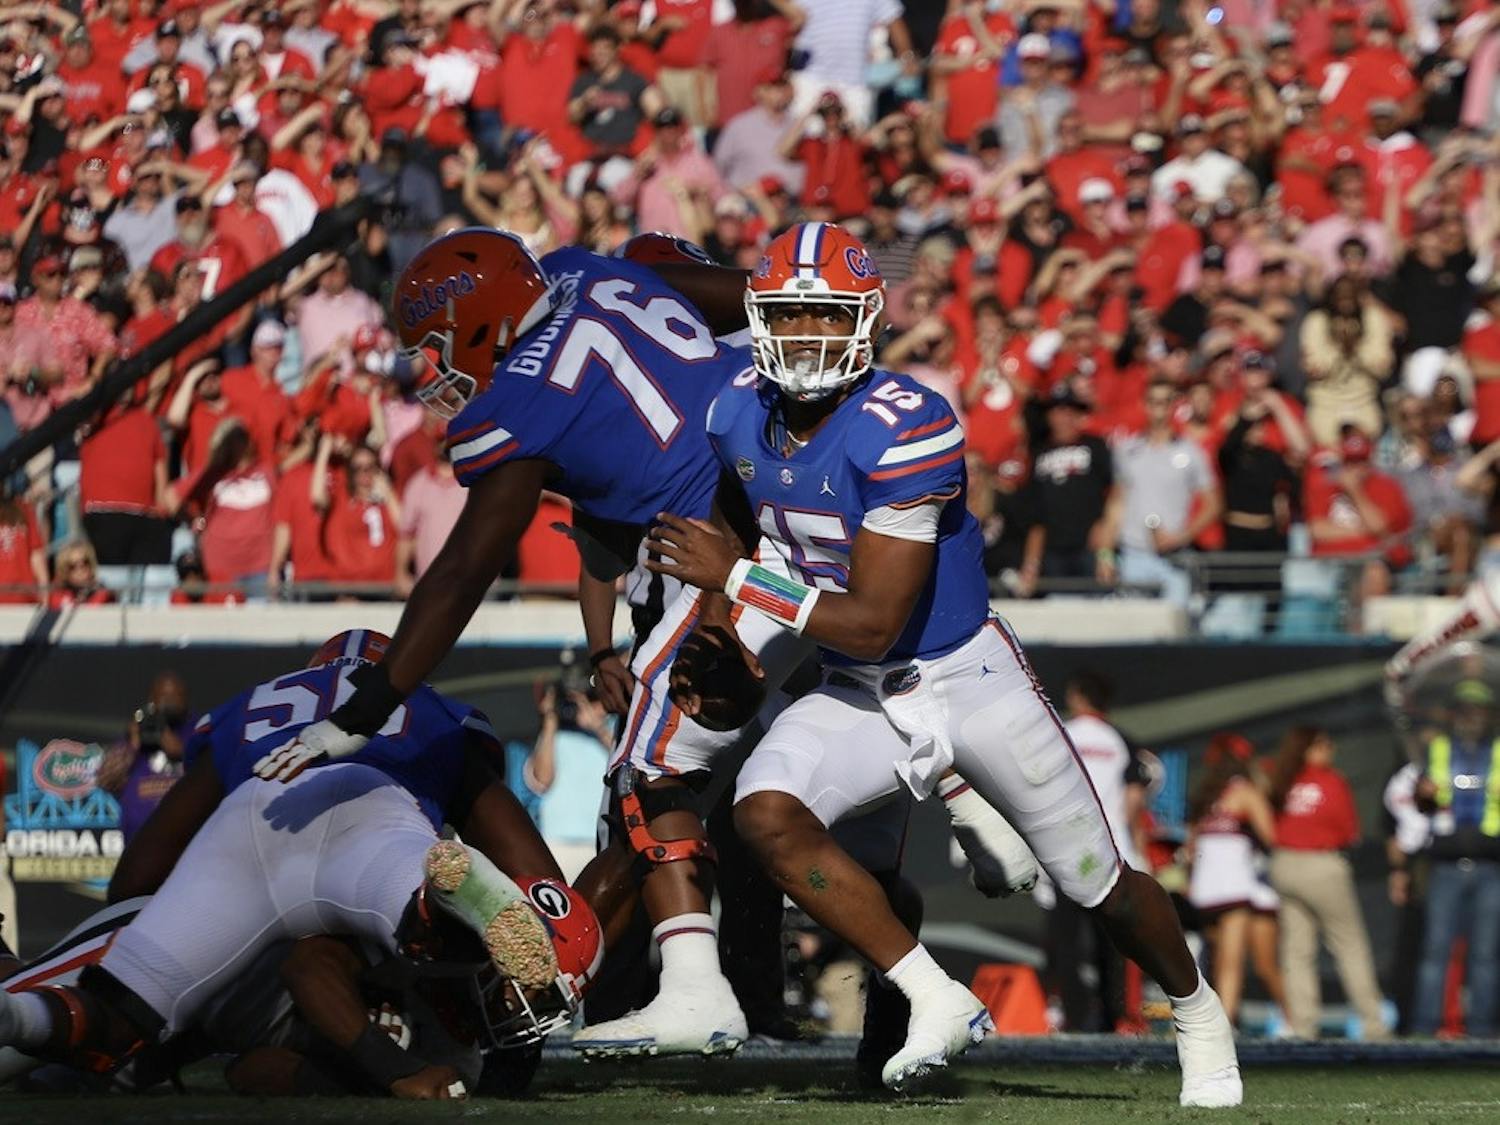 Florida's Anthony Richardson scrambles during an Oct. 30 game against Georgia